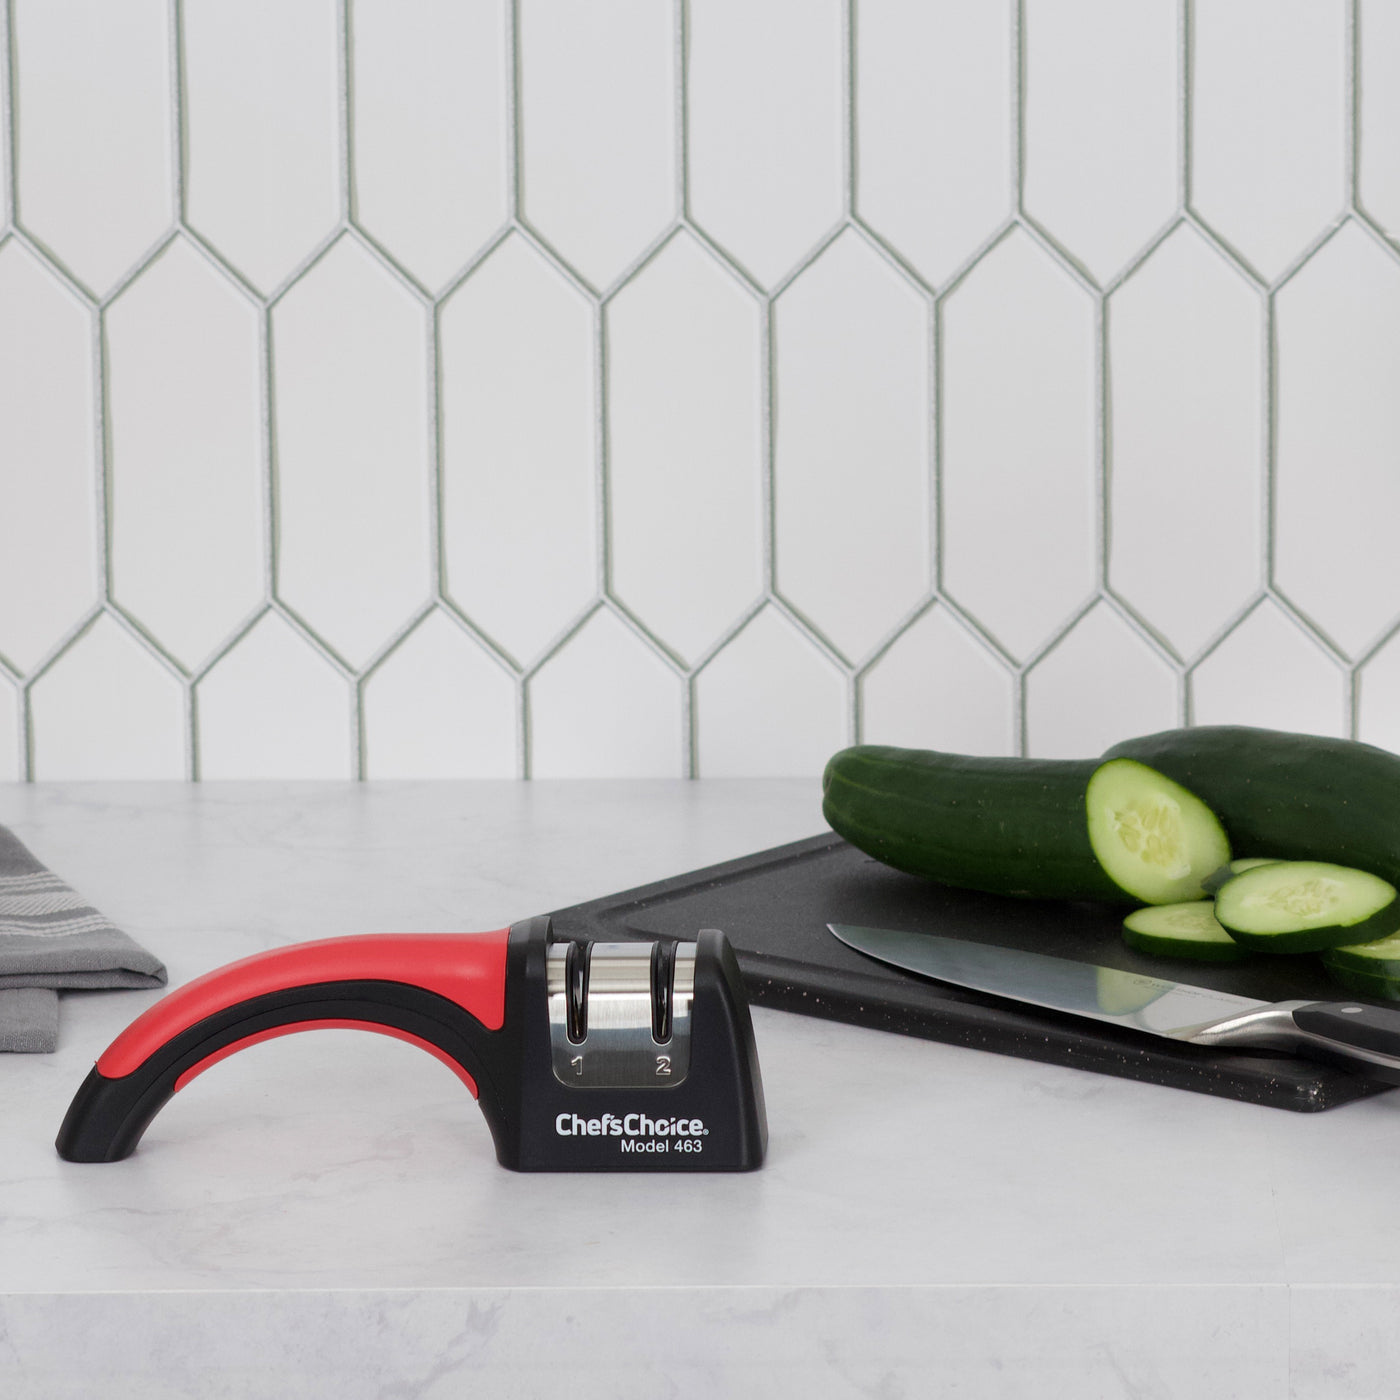 5 Of The Best Knife Sharpeners For Chefs - Ideal Magazine